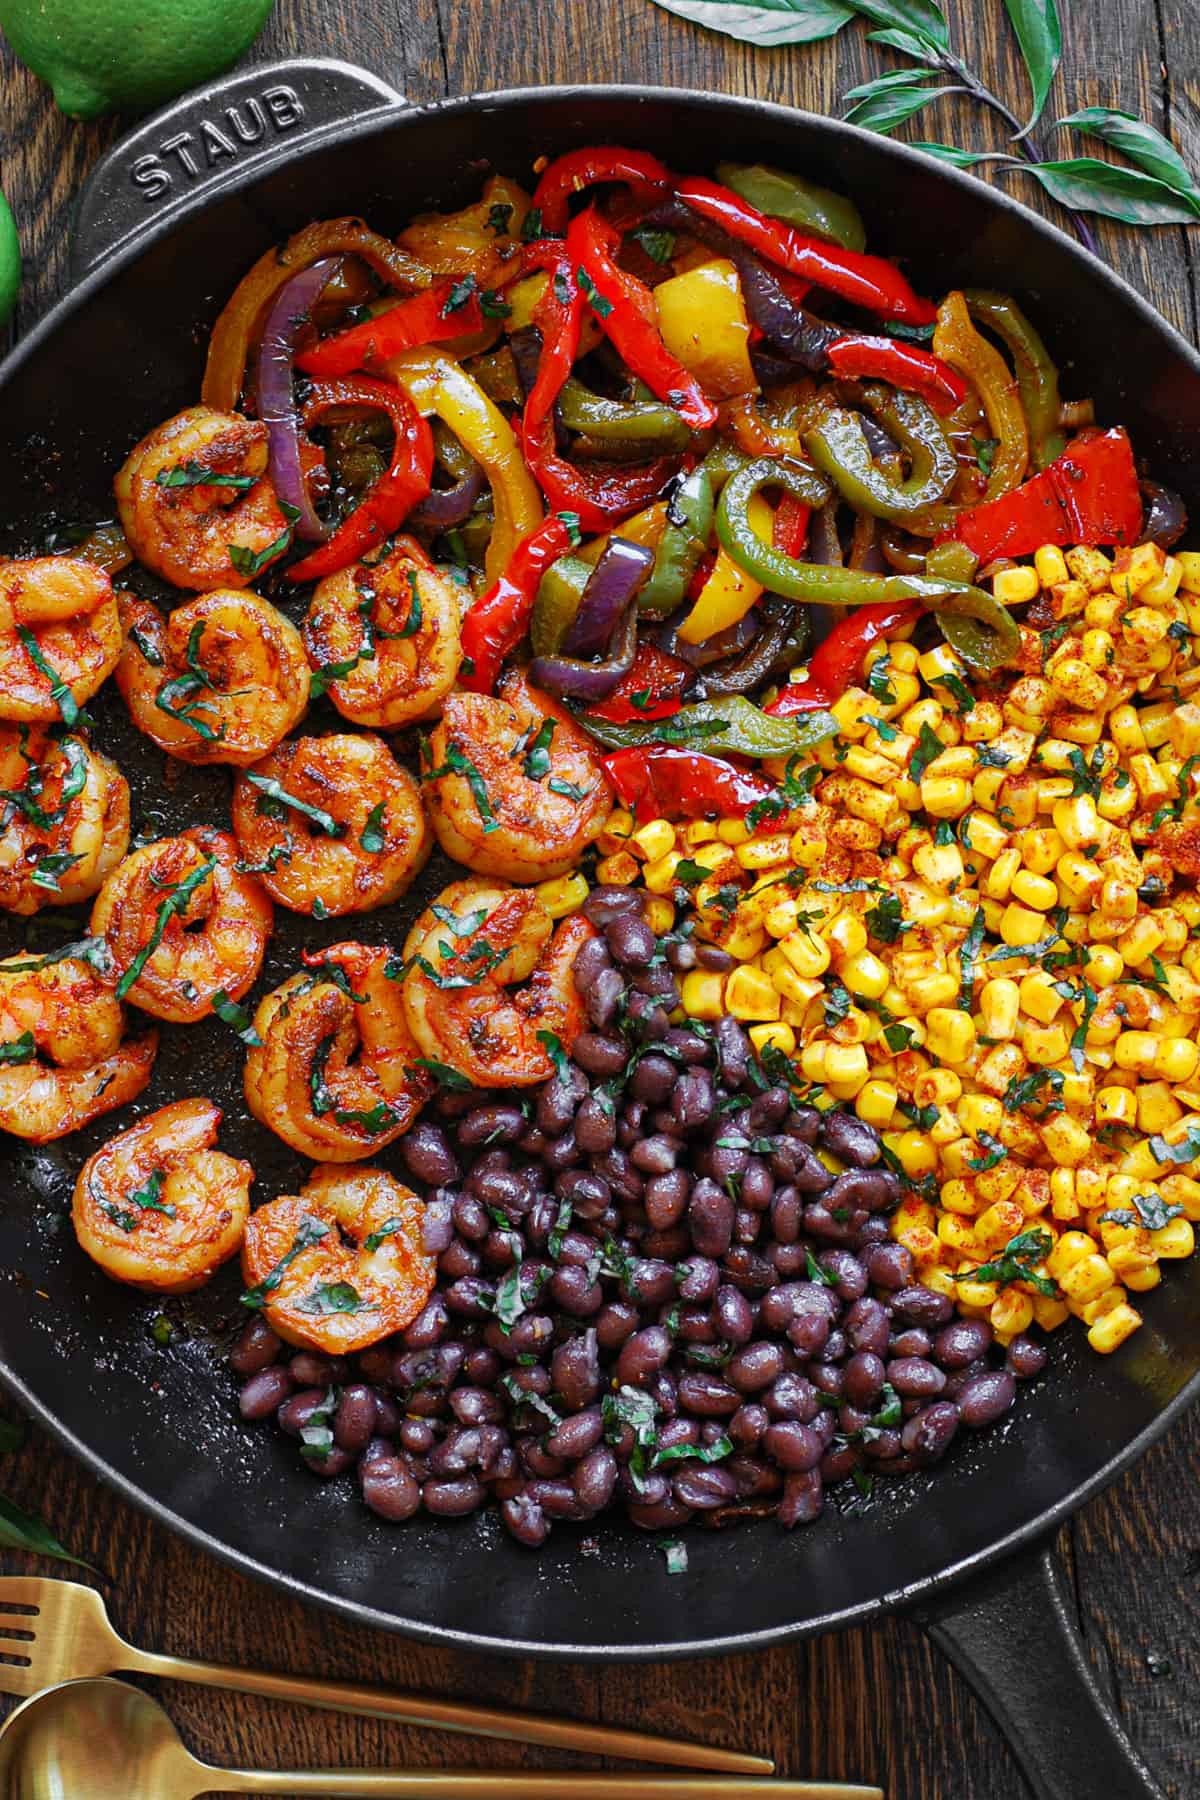 Shrimp Fajitas with bell peppers, red onions, black beans, and corn - in a cast iron skillet.